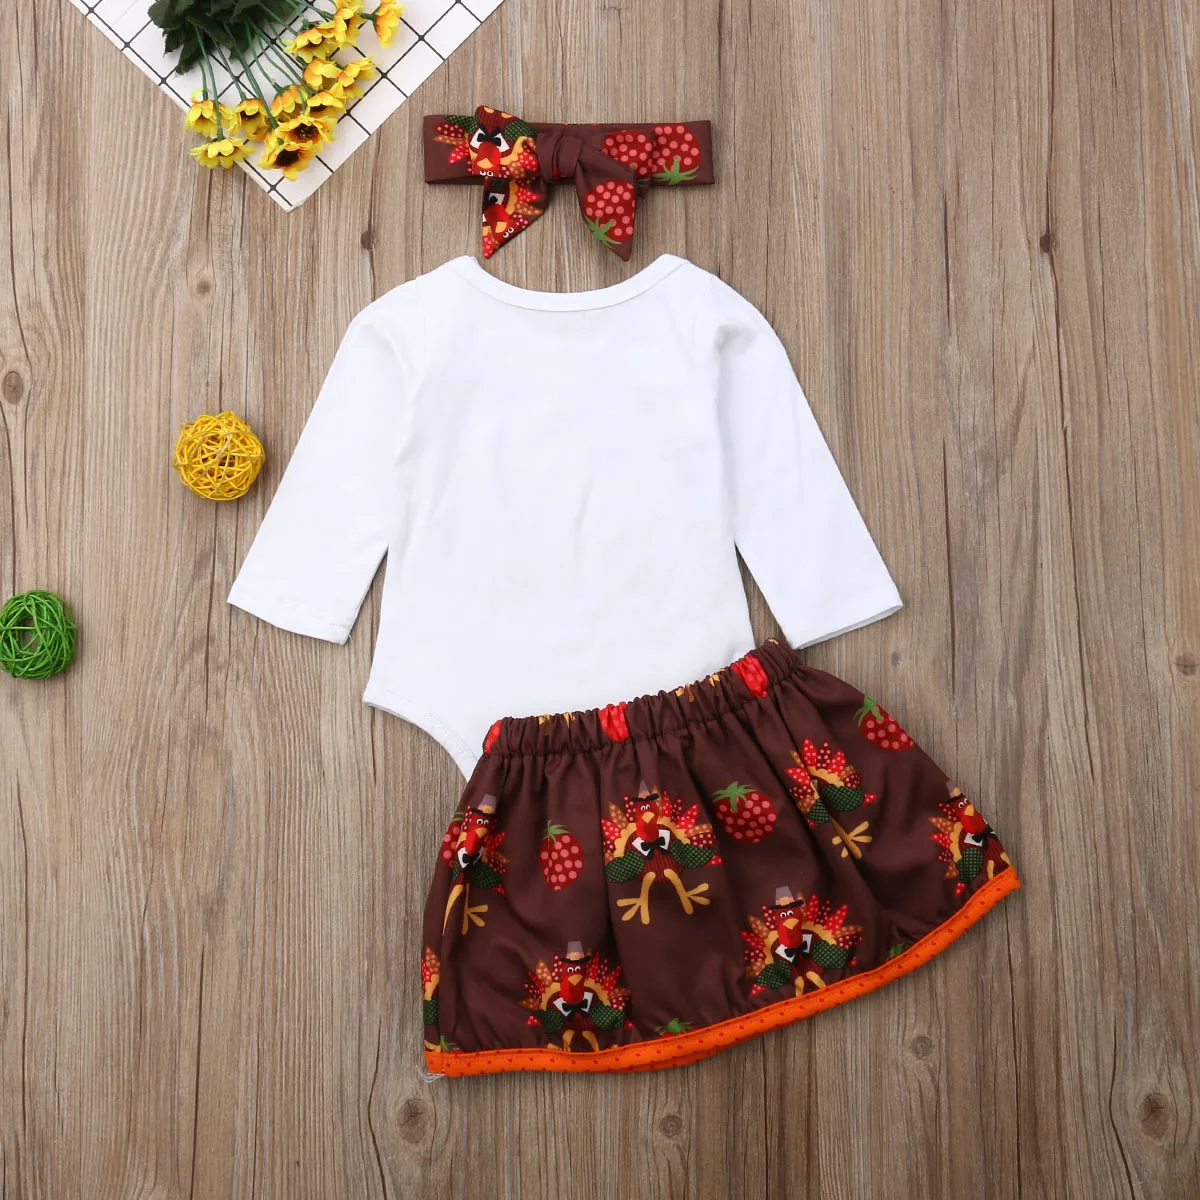 

Baby Girls My 1st Thanksgiving Outfit Long Sleeve Letter Romper Tops+BowKnot Tutu Skirts+Headband Infant 3PCS Clothes Set 0-24M